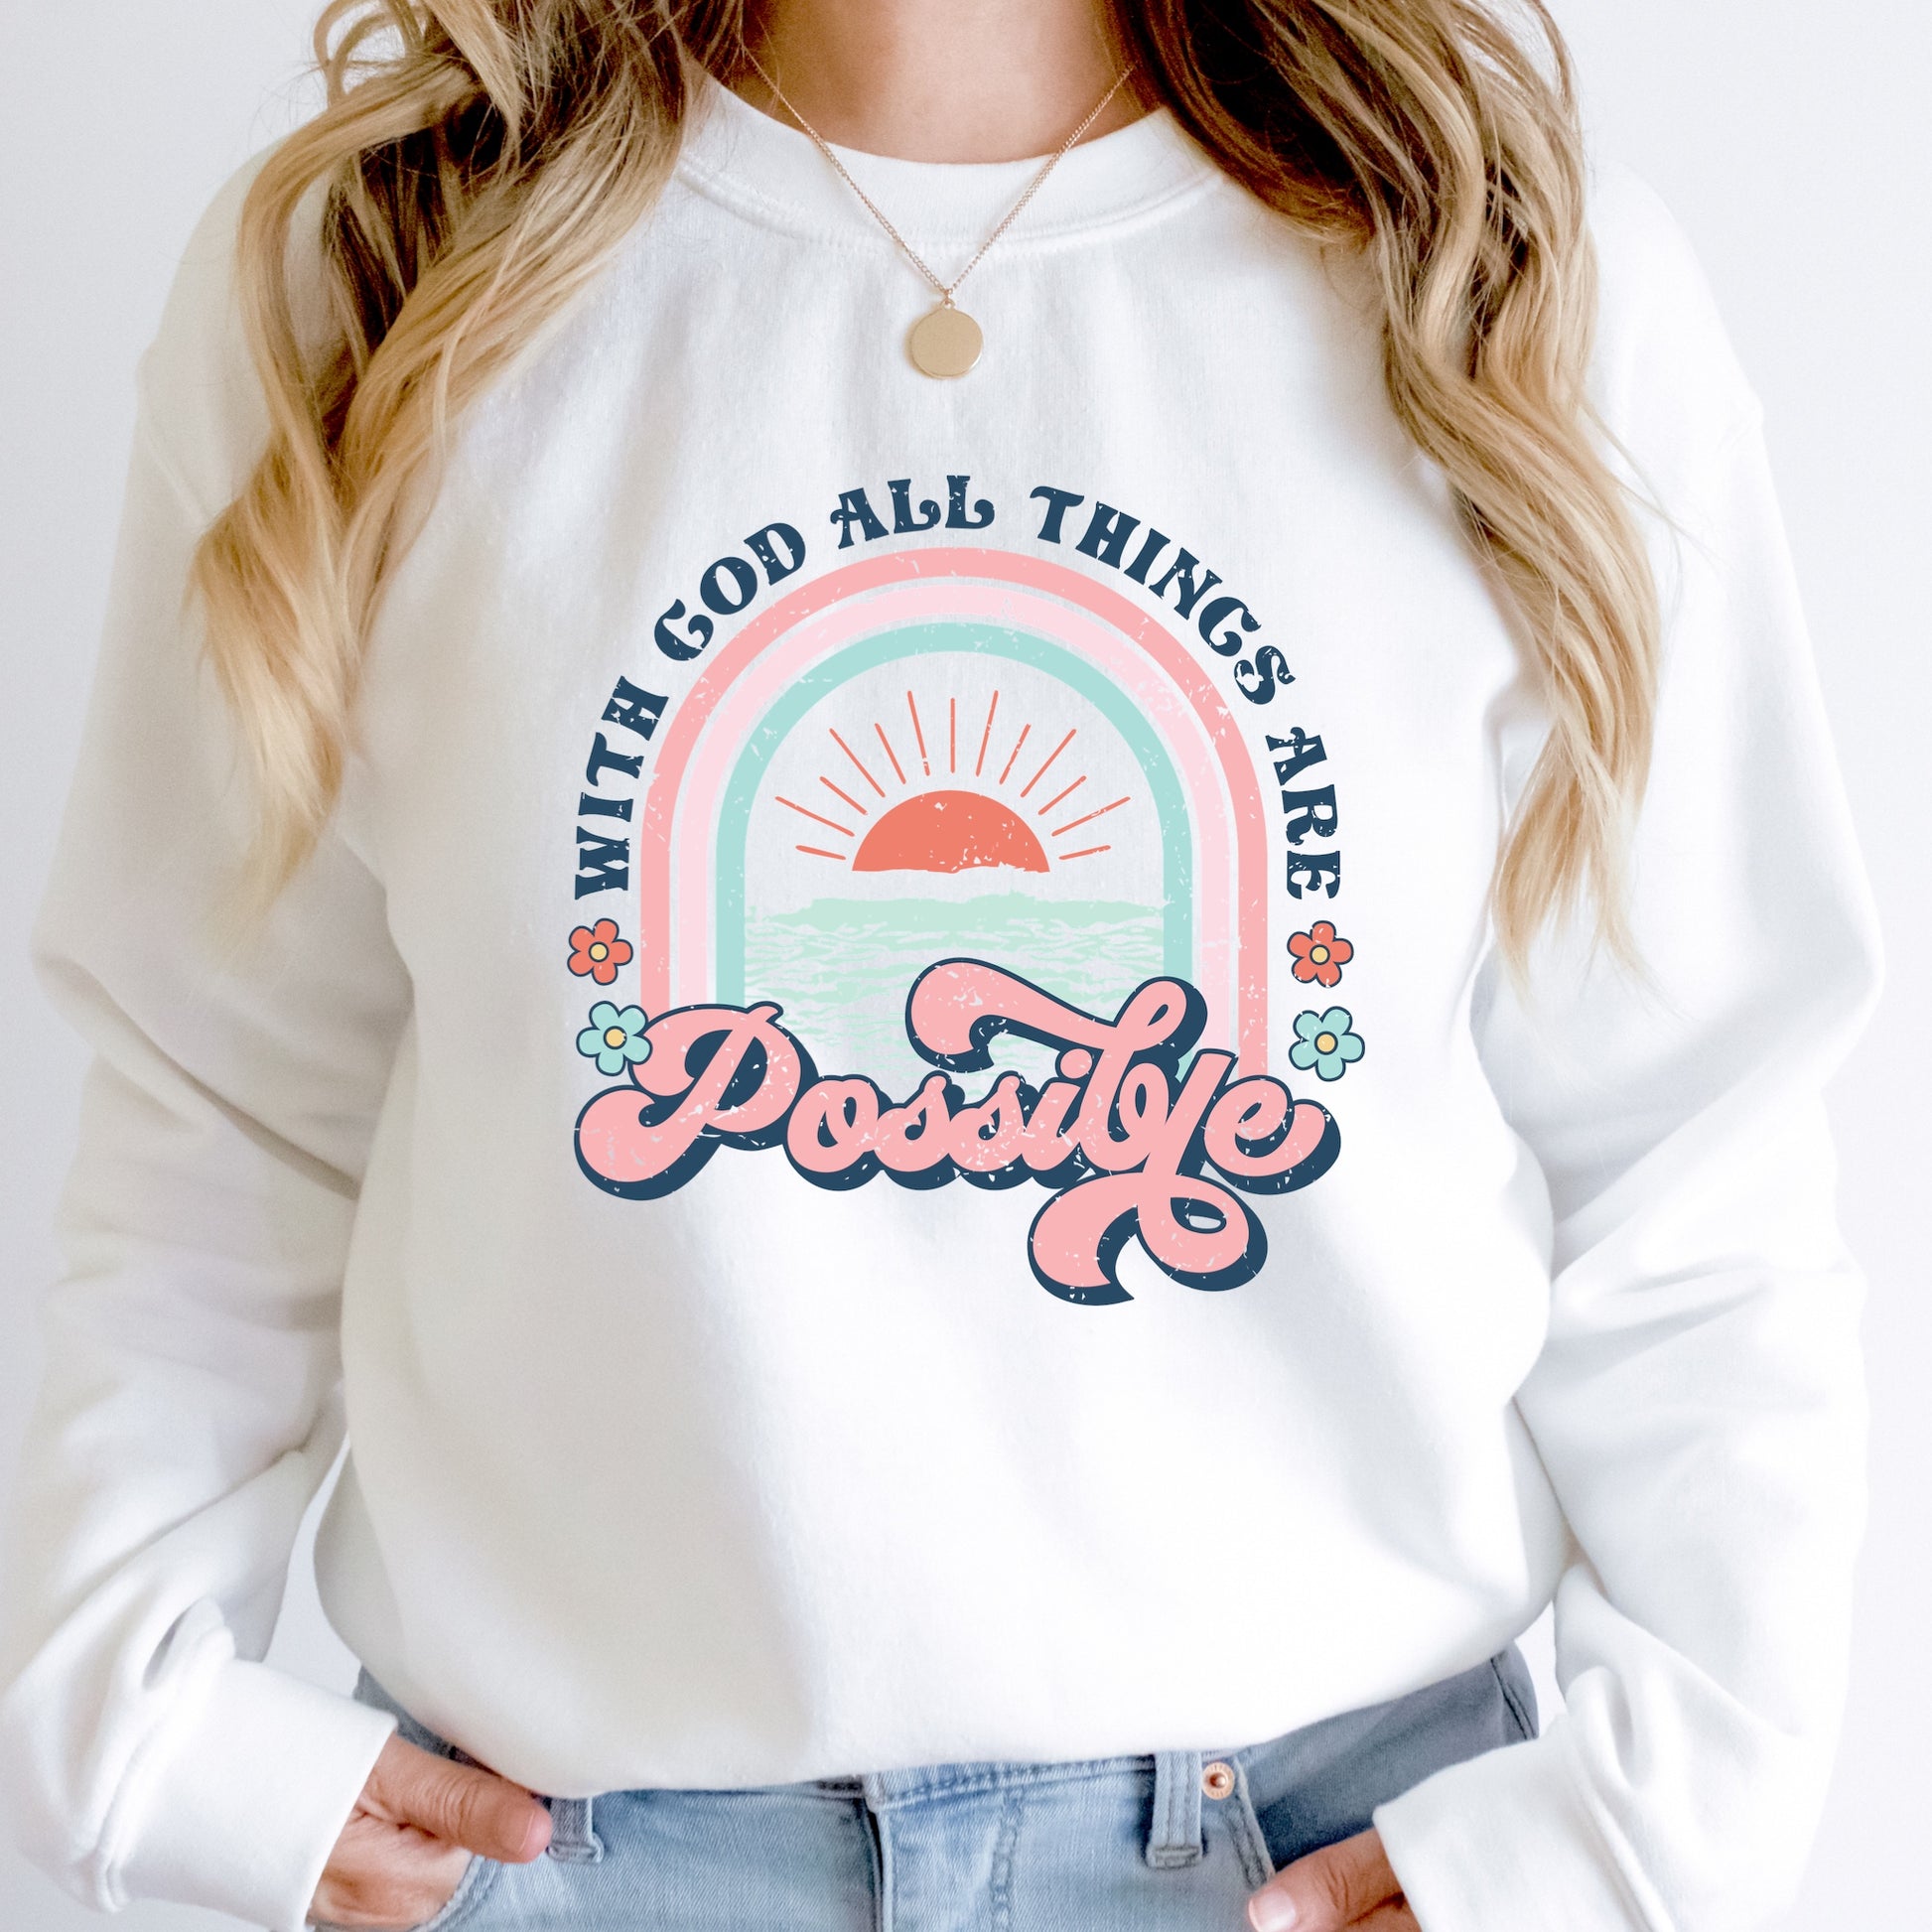 Faith-Based graphic iron on with the words "With God All Things are possible" Pink, Aqua, Coral and Navy Letters - DTF Iron on Transfer - Sublimation Iron on Transfer 